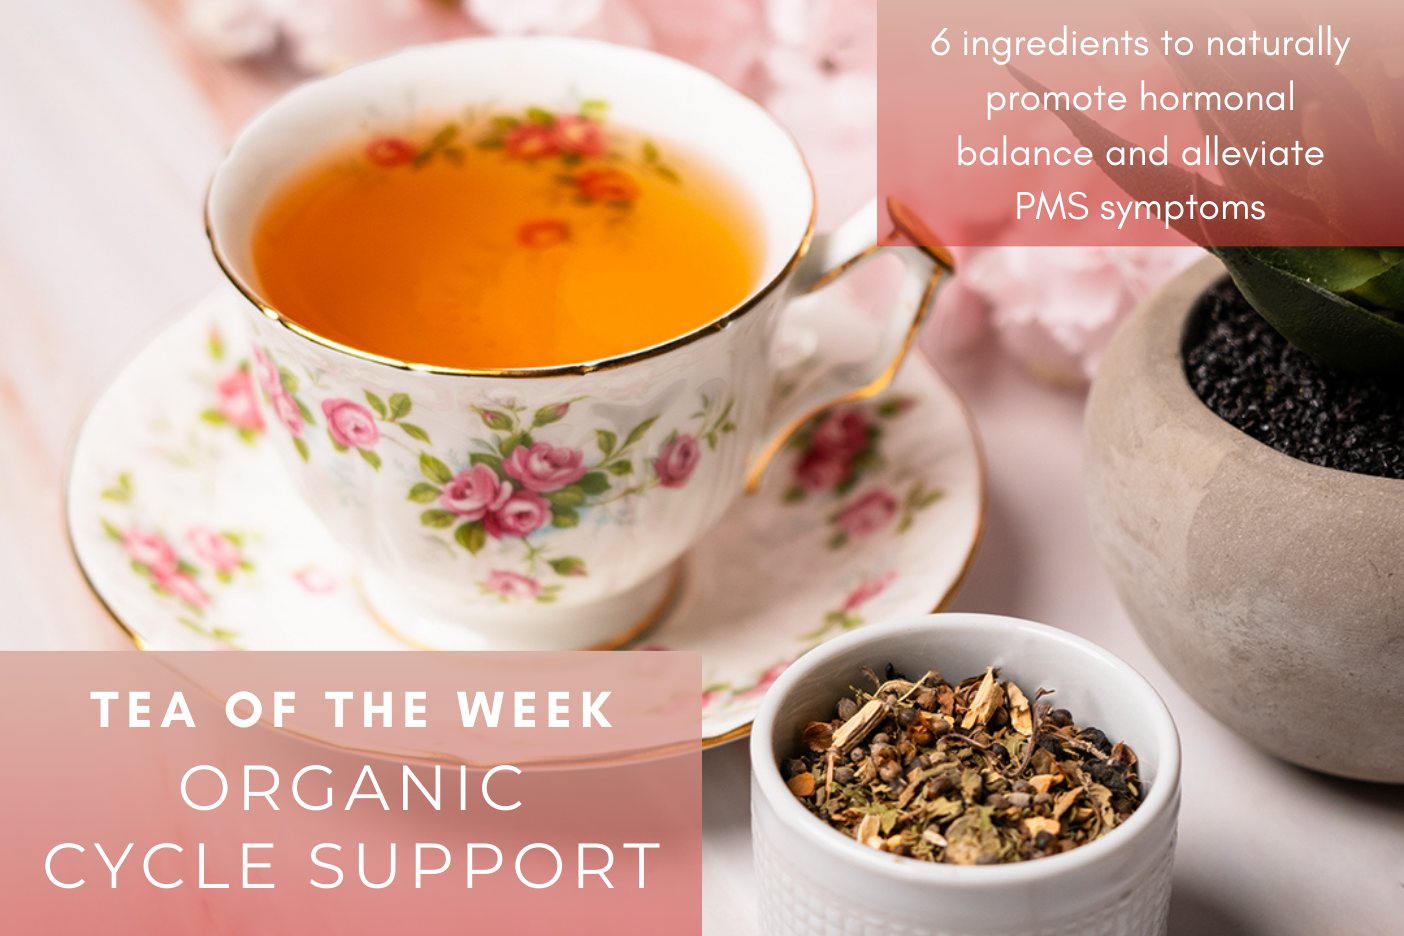 Tea of the Week - Organic Cycle Support